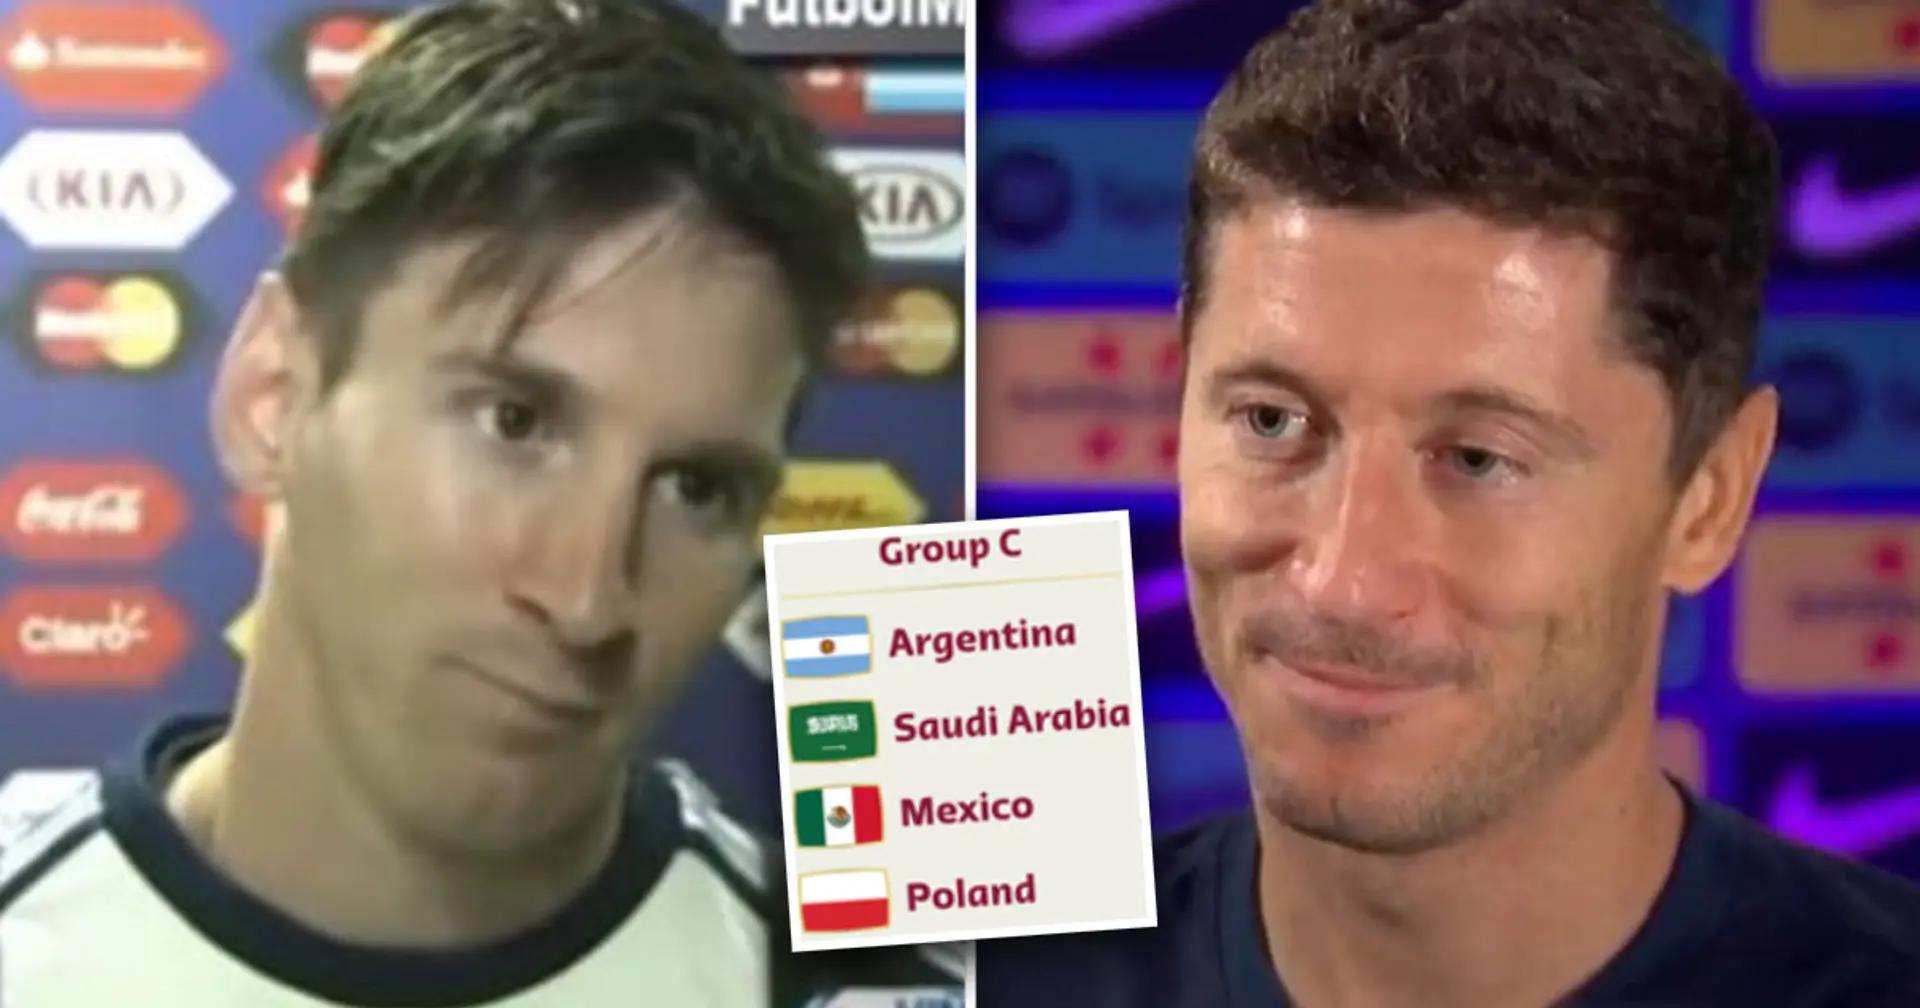 Lewandowski opens up on facing Messi at World Cup, makes big prediction for Argentina